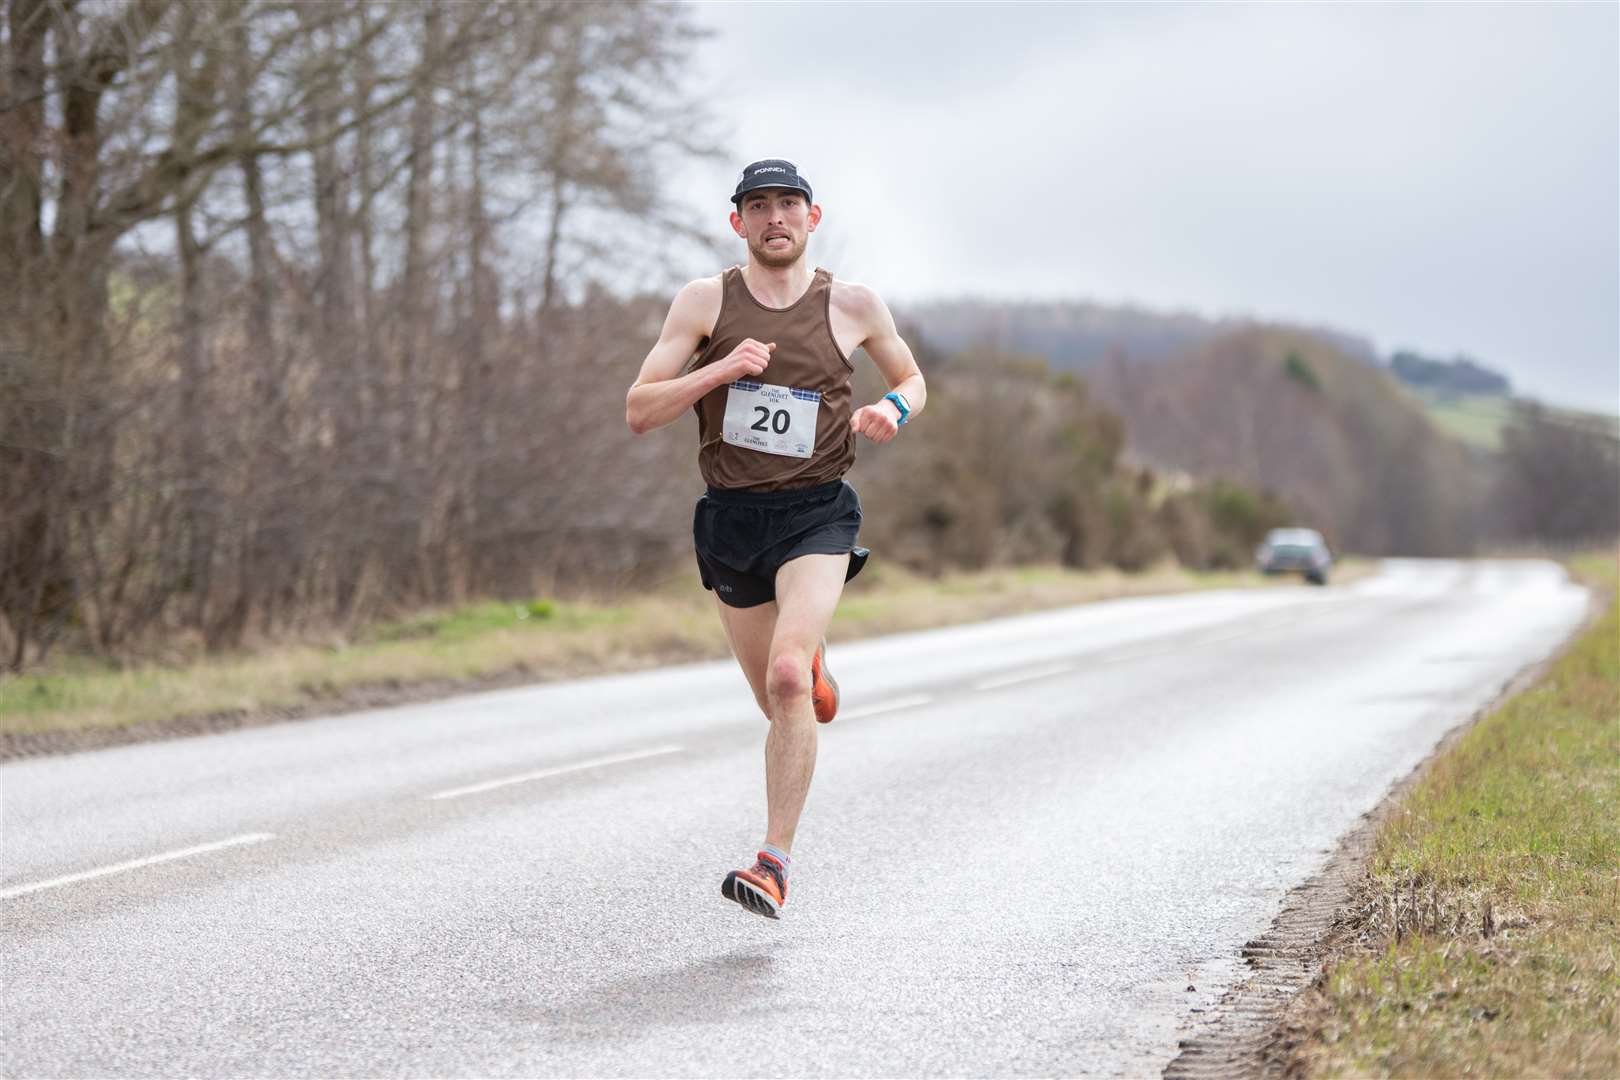 Alasdair Bisset finished the race 1st overall with a time of 35:19. ..2023 Glenlivet 10k Race, which raises money for Chest Heart & Stroke Scotland. .. Picture: Daniel Forsyth..